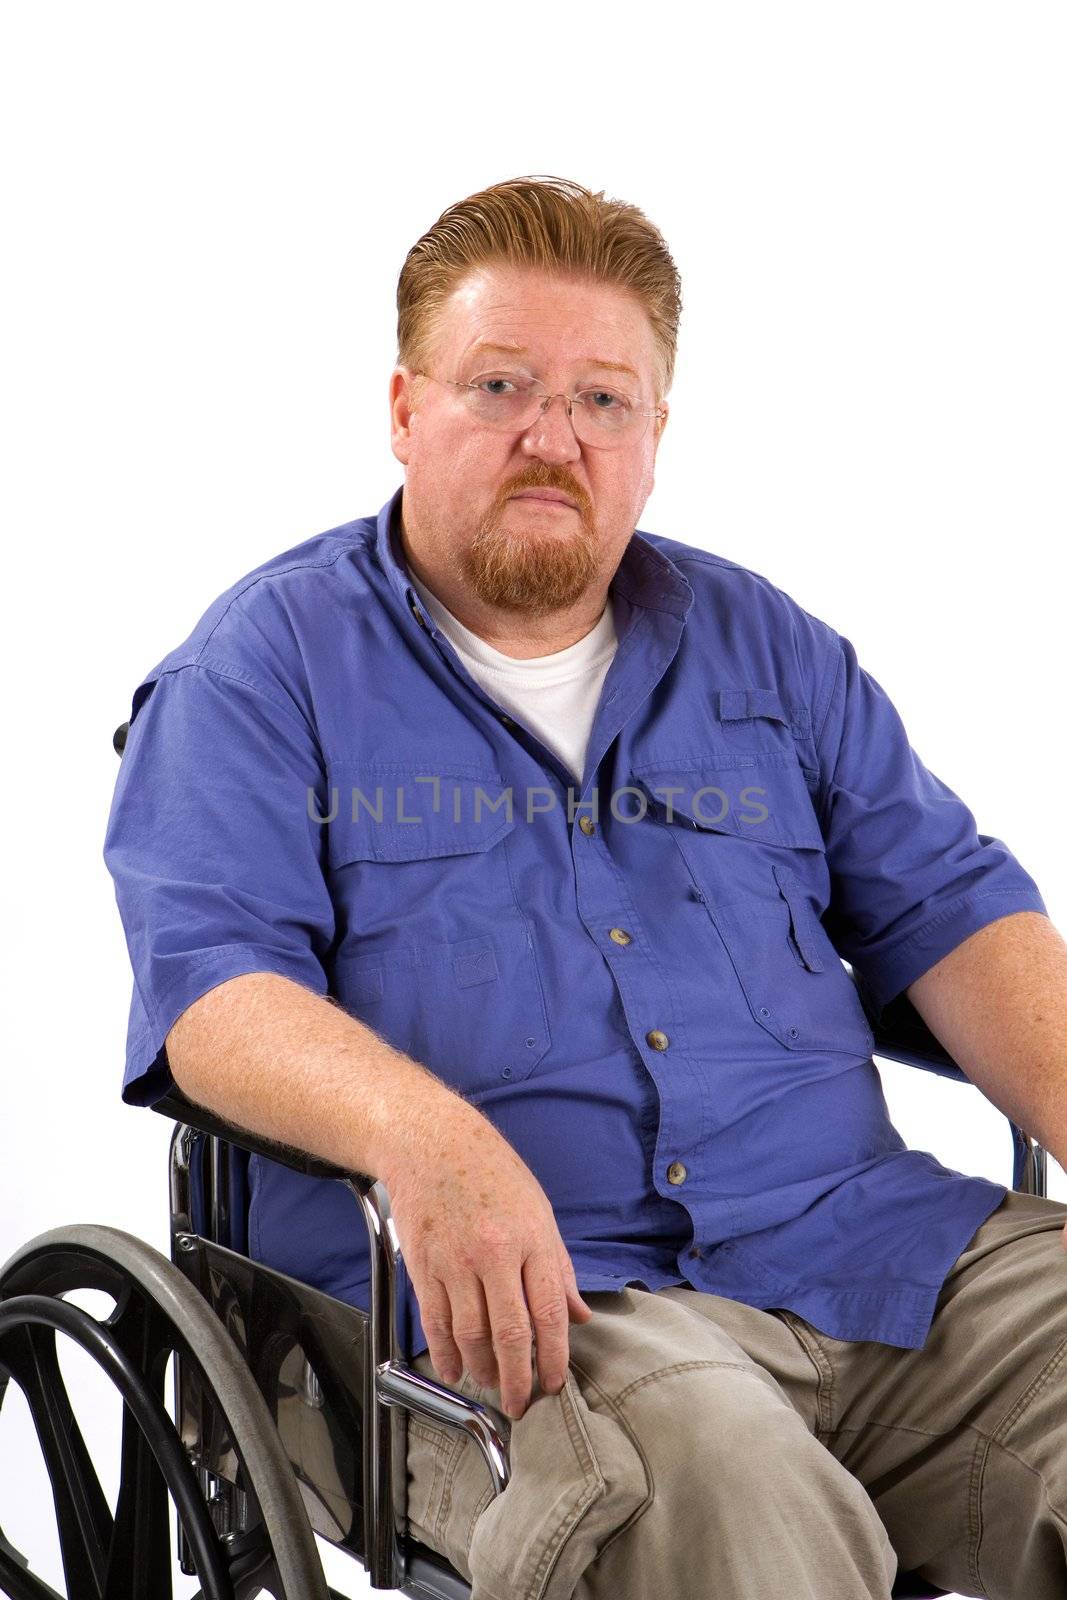 Overweight disabled man sits in a wheelchair with a sad expression on his face.